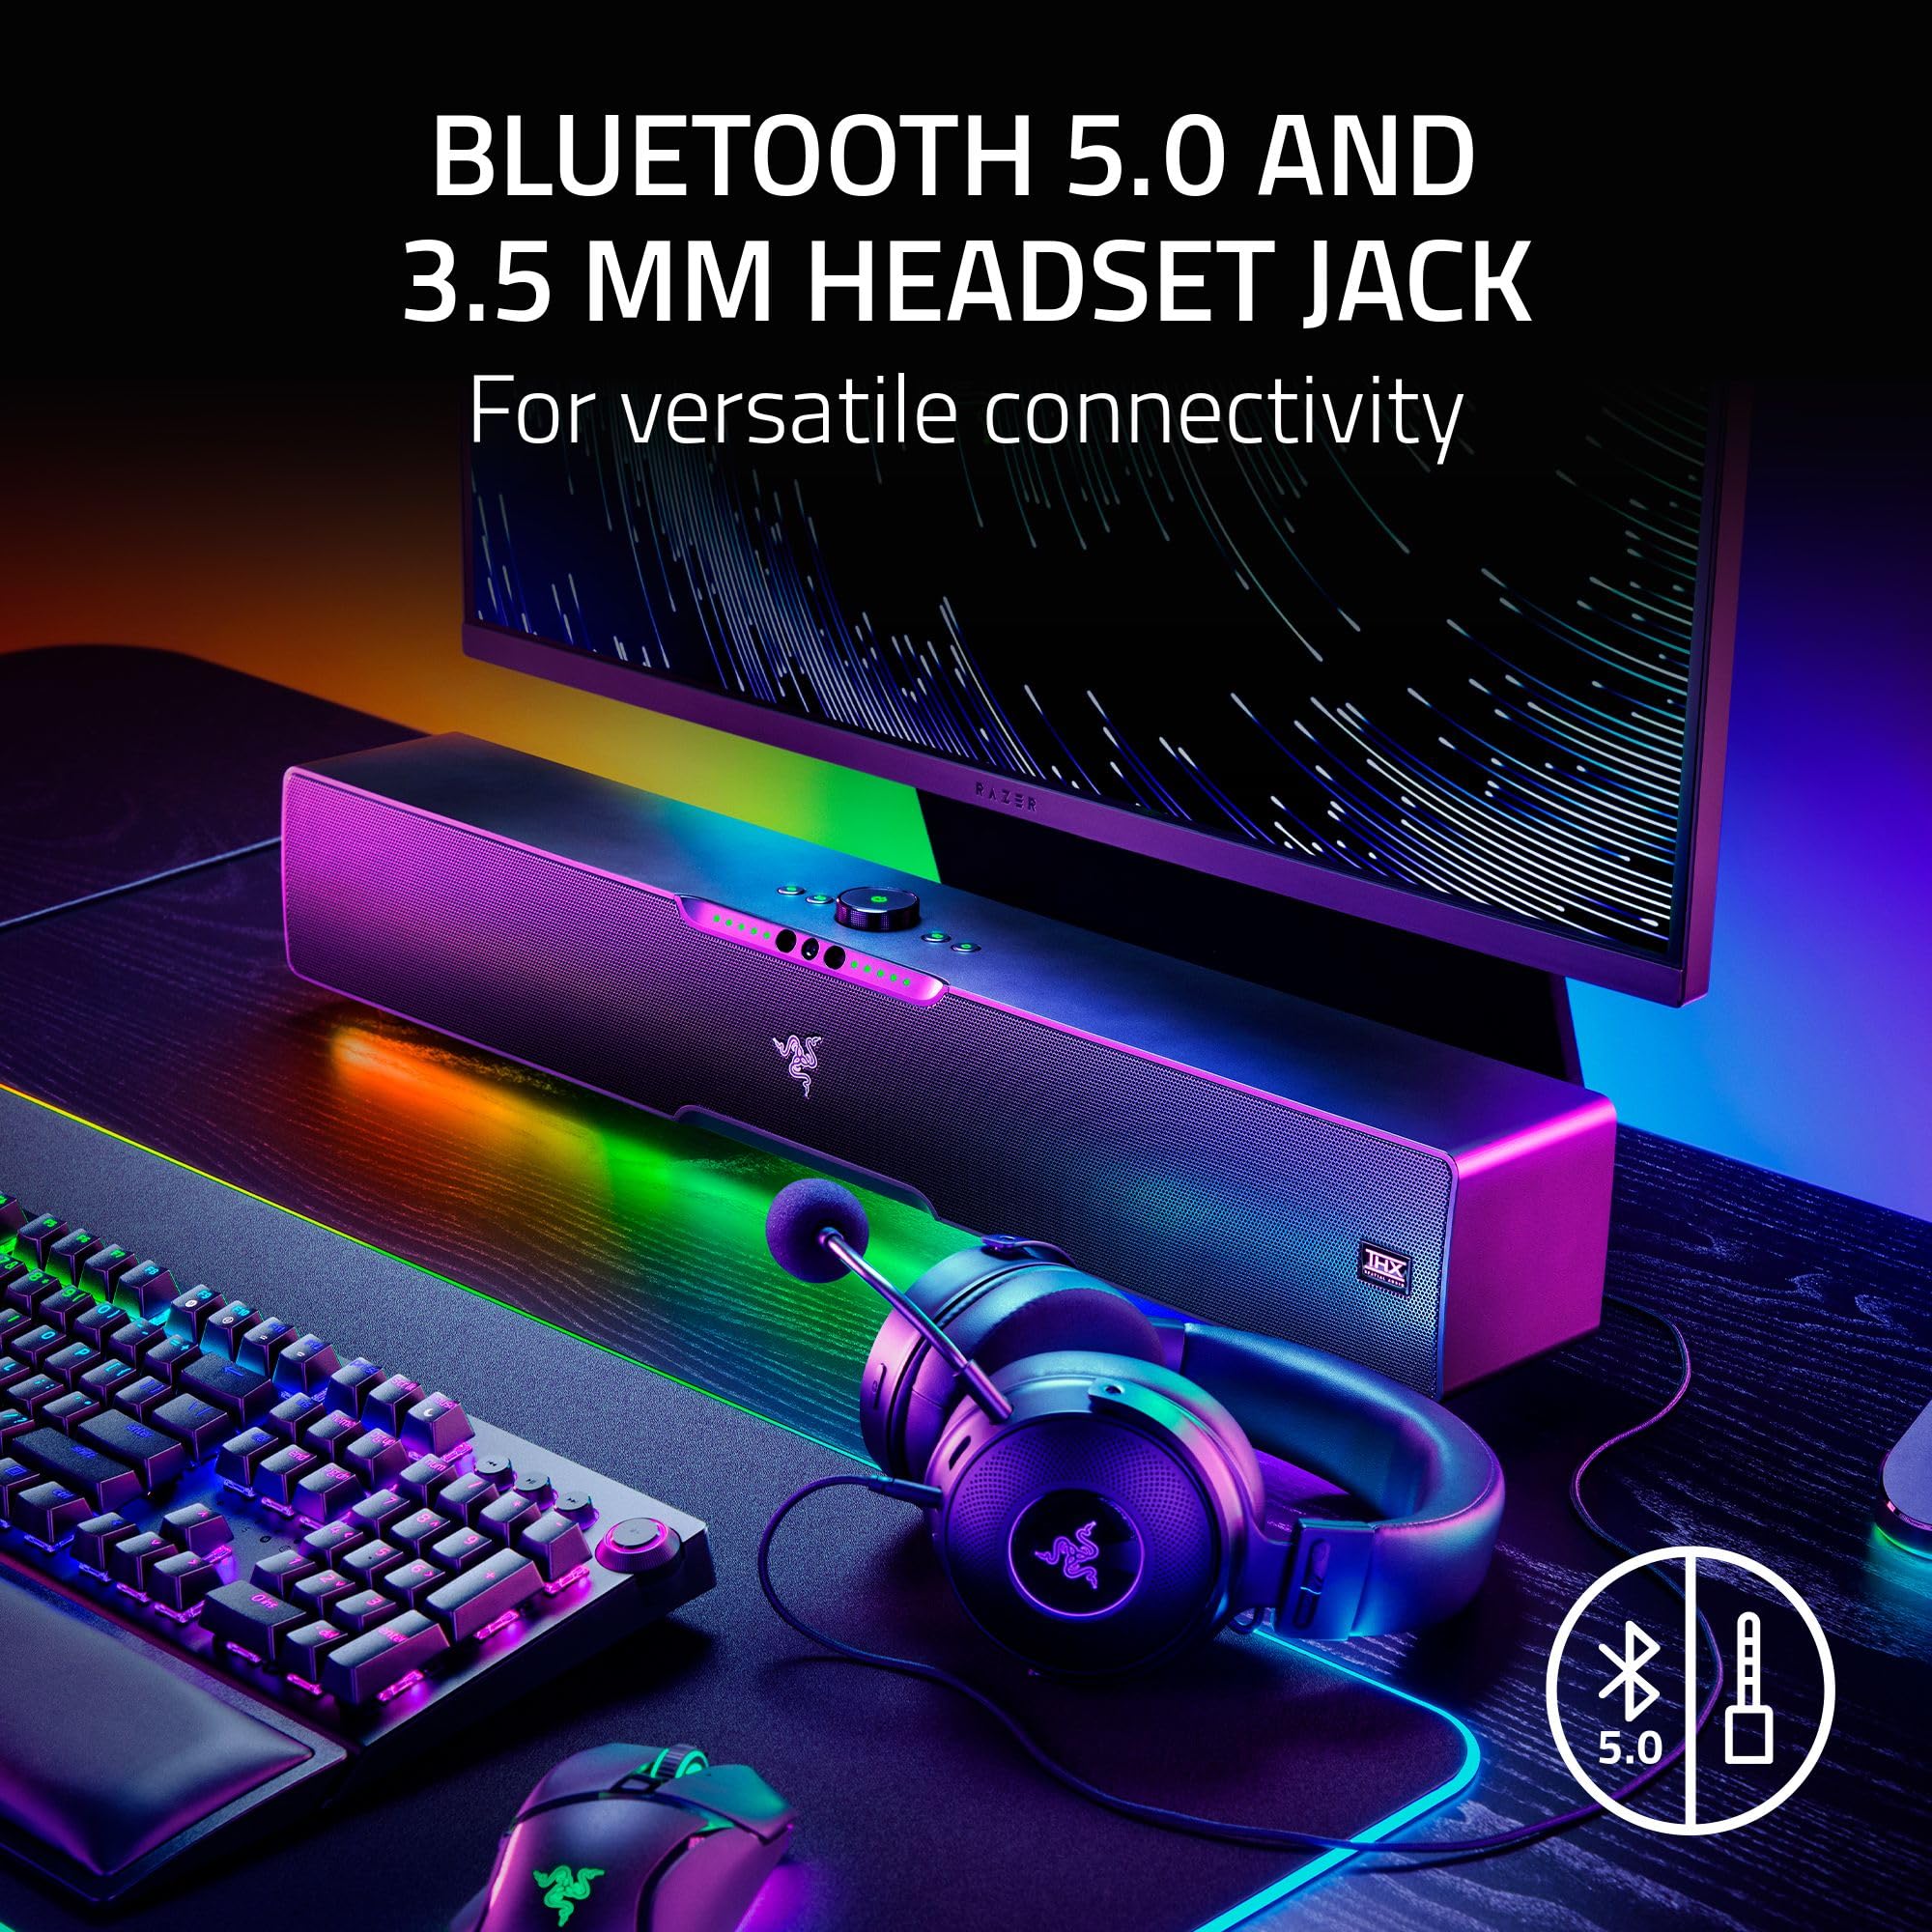 Razer Leviathan V2 Pro: Multi-Driver PC Gaming Soundbar with Subwoofer - Beamforming Surround Sound with AI Head Tracking - Chroma RGB - Bluetooth 5.0 & 3.5mm - for PC, Desktop/Laptop, Mobile, Switch